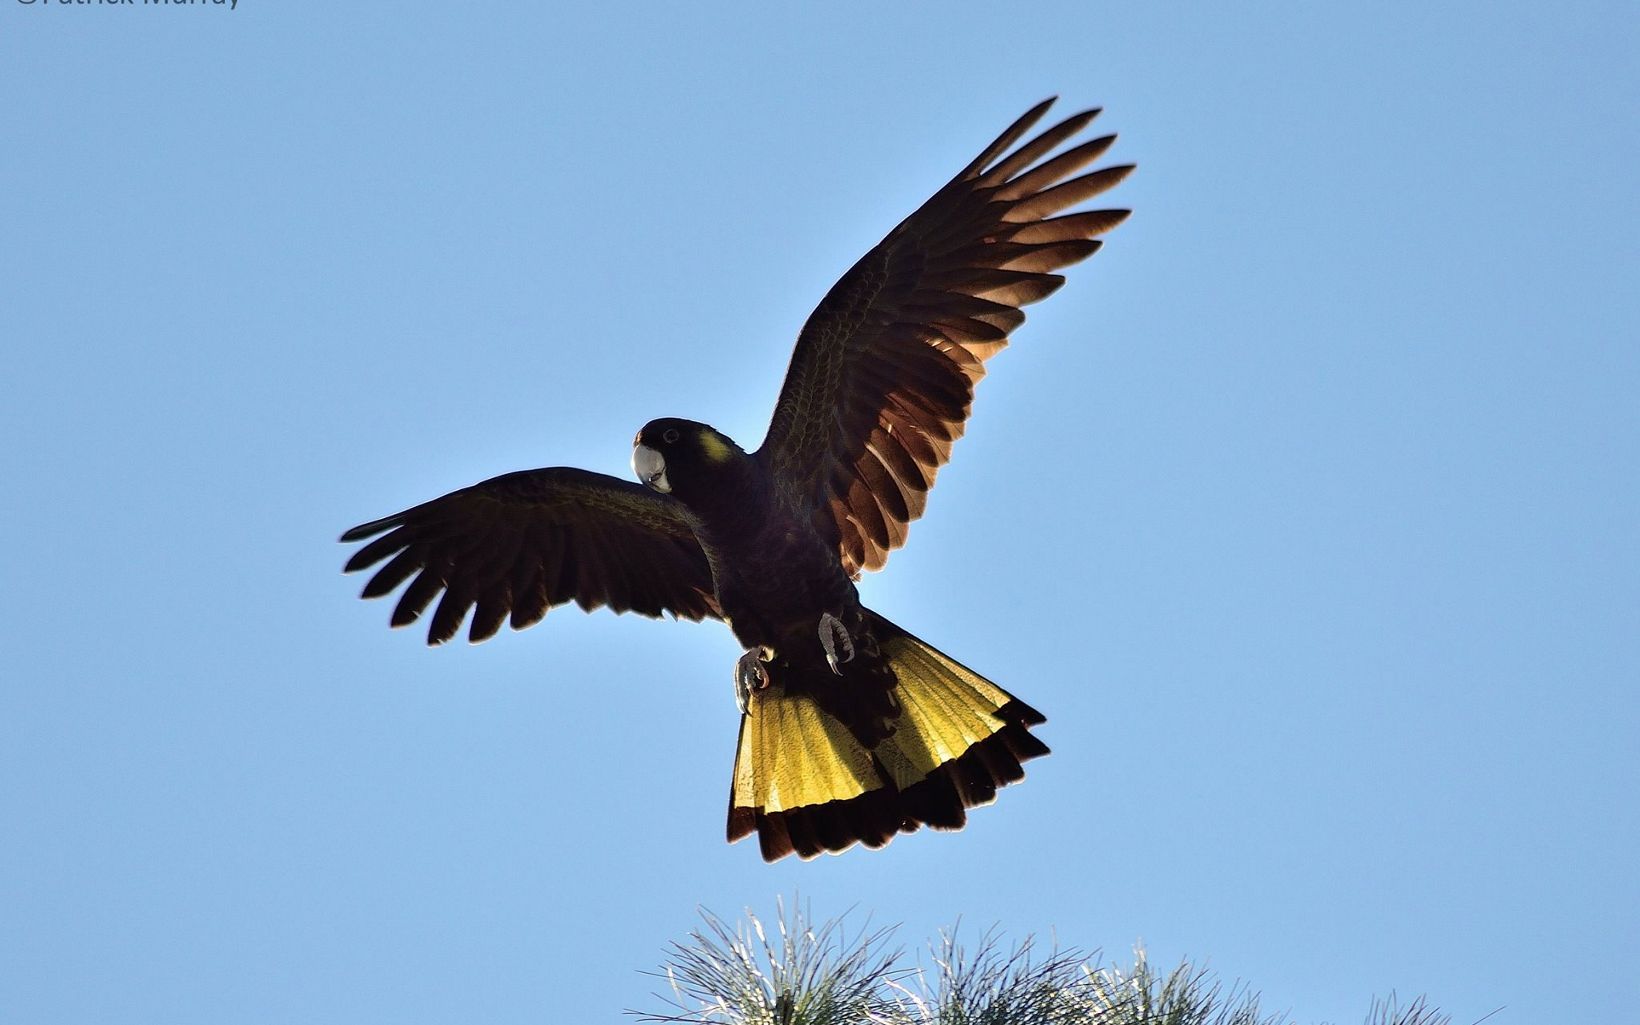 one of six species of Black-Cockatoo in Australia. In recent years it has been in rapid decline because of native habitat clearance, with a loss of food supply and nest sites.